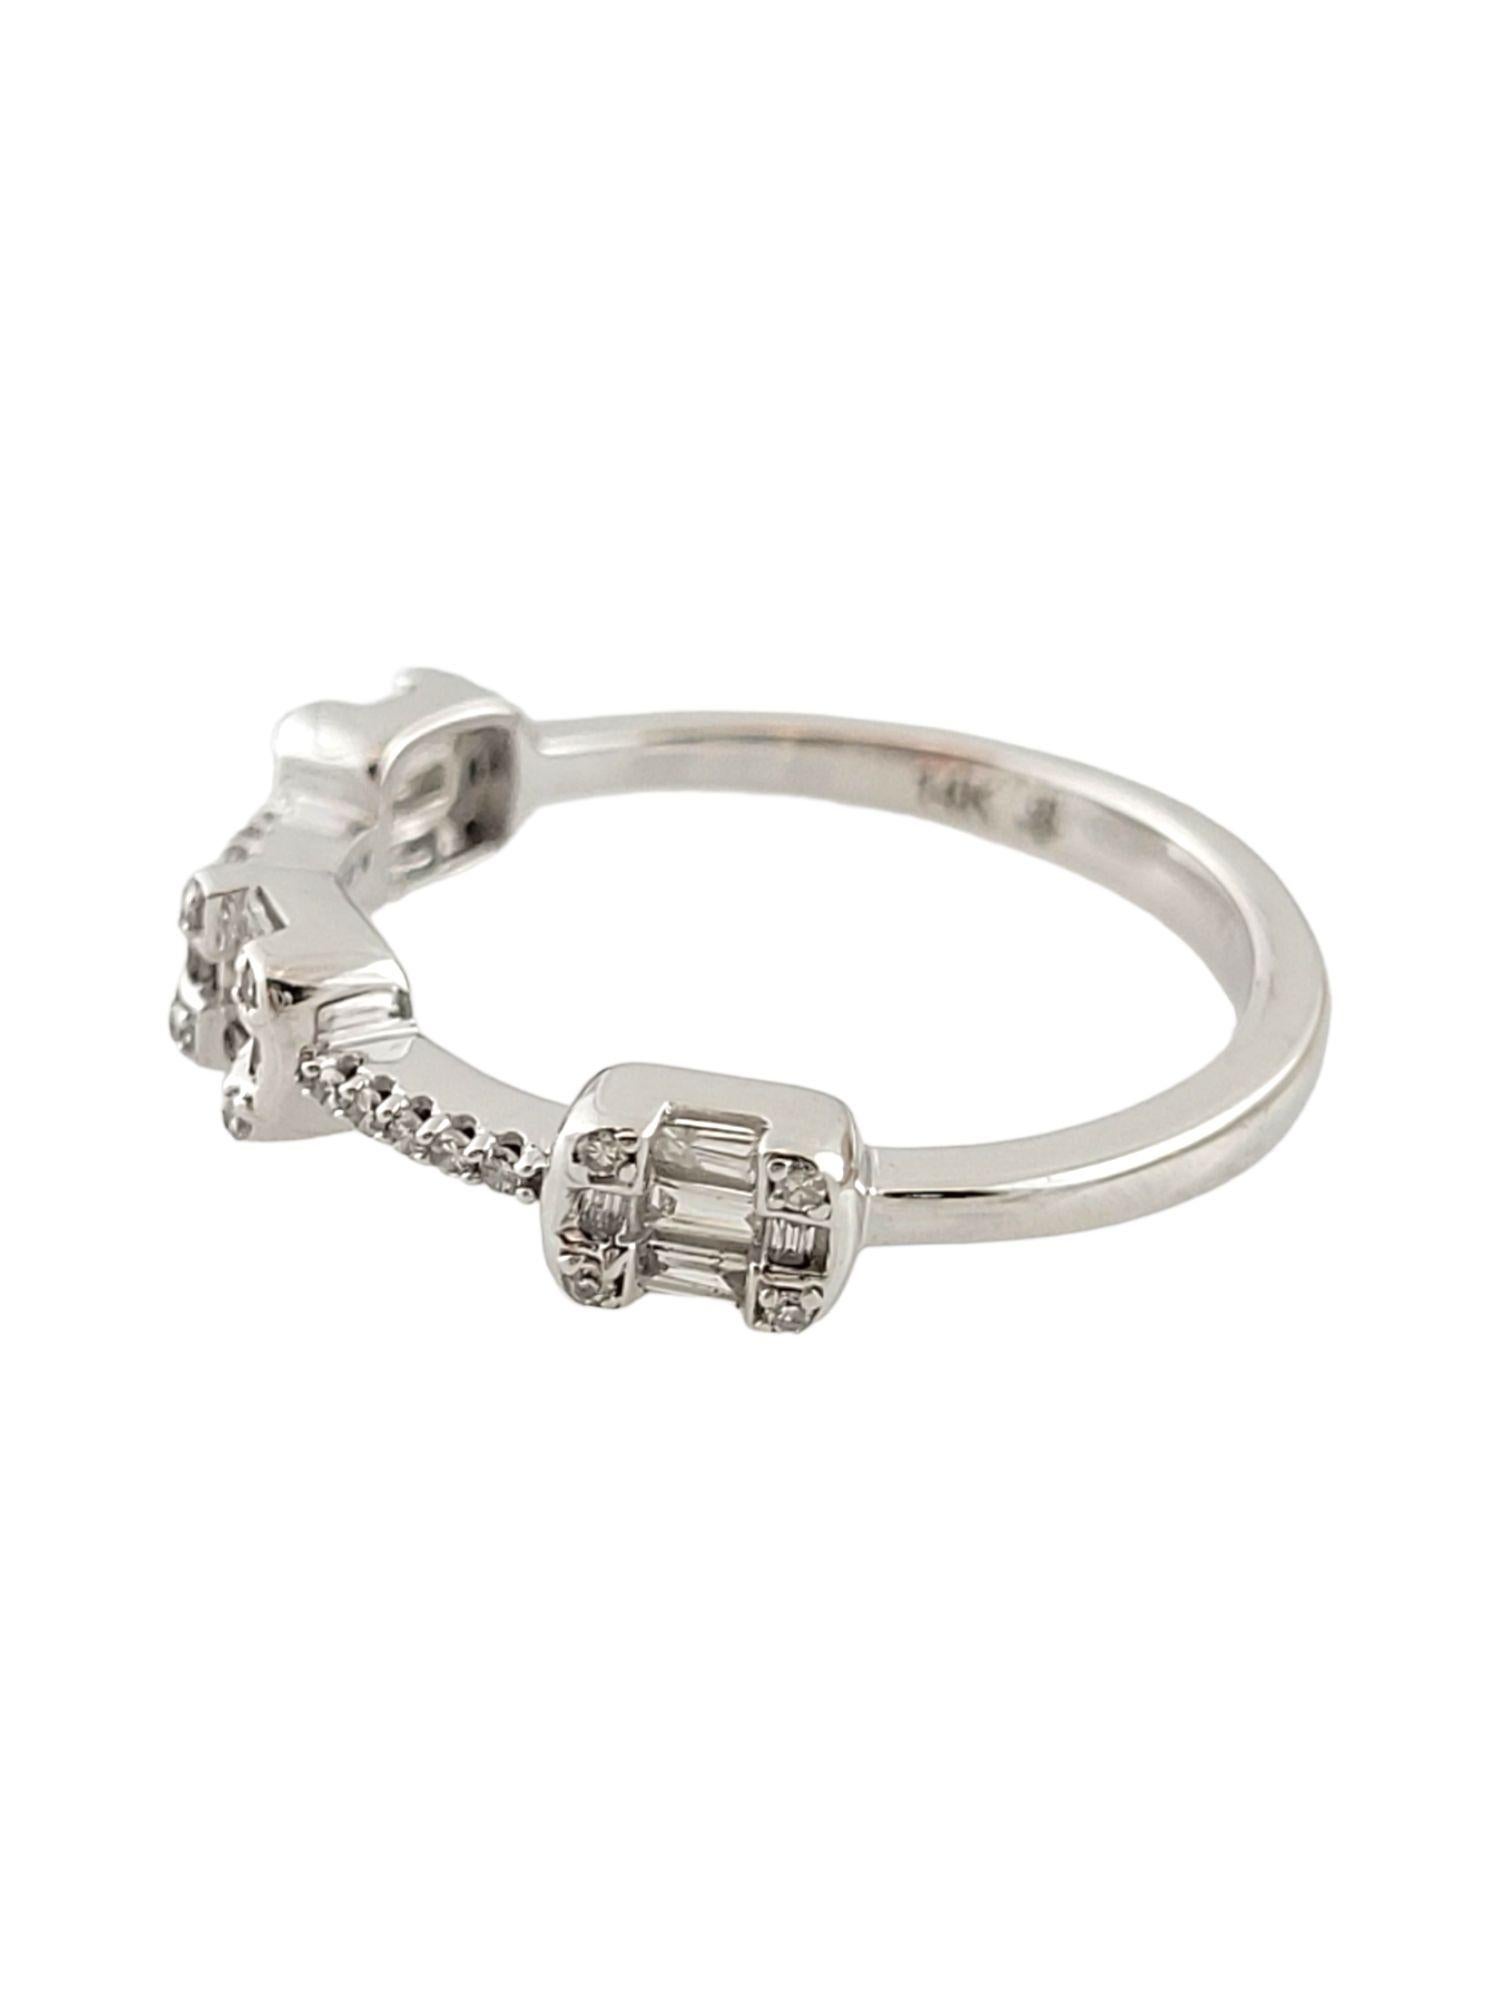 This gorgeous band is crafted from 14K white gold and features 22 sparkling, single cut diamonds surrounding 15 beautiful baguette cut diamonds!

37 diamonds total

Approximate total diamond weight: .16 cttw

Diamond clarity: SI1-I2

Diamond color: